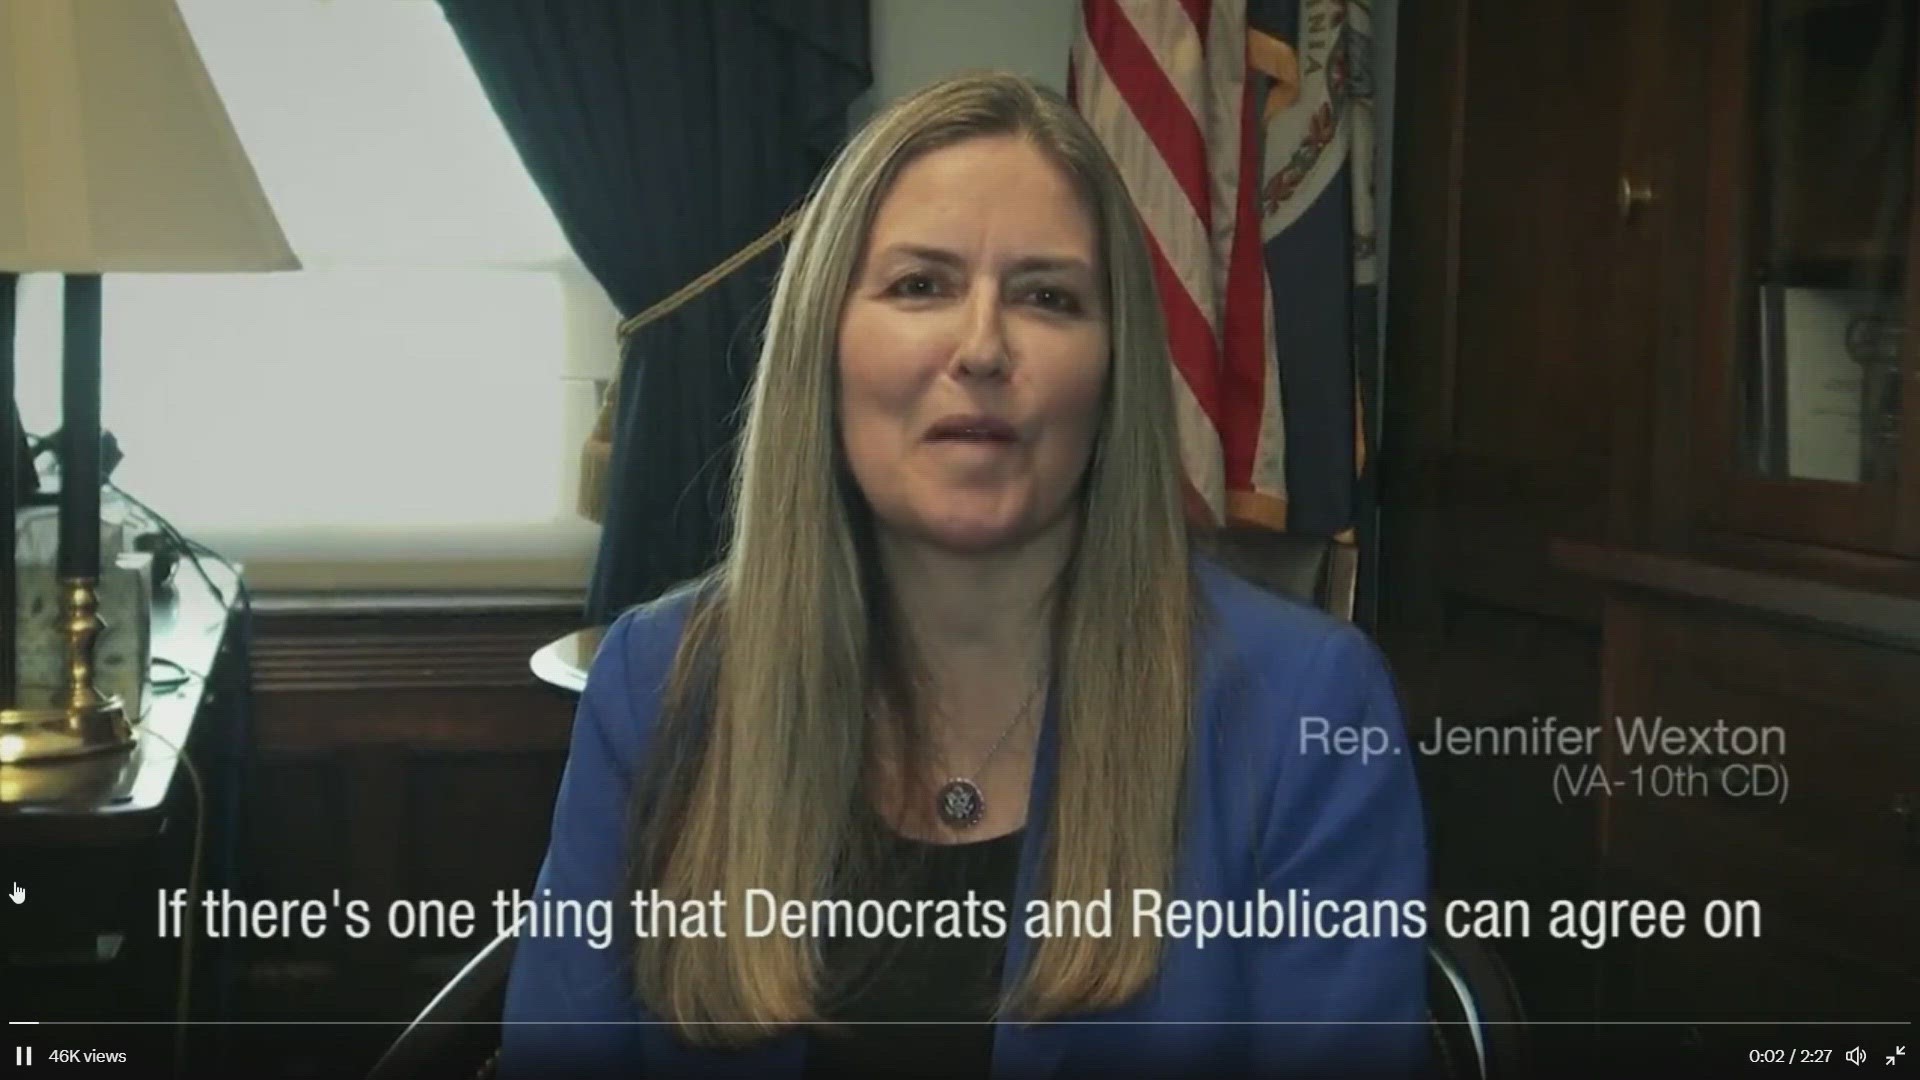 Wexton revealed her diagnosis Tuesday in a video and vowed to continue her work in Congress, saying, “I’m not going to let Parkinson’s stop me from being me."